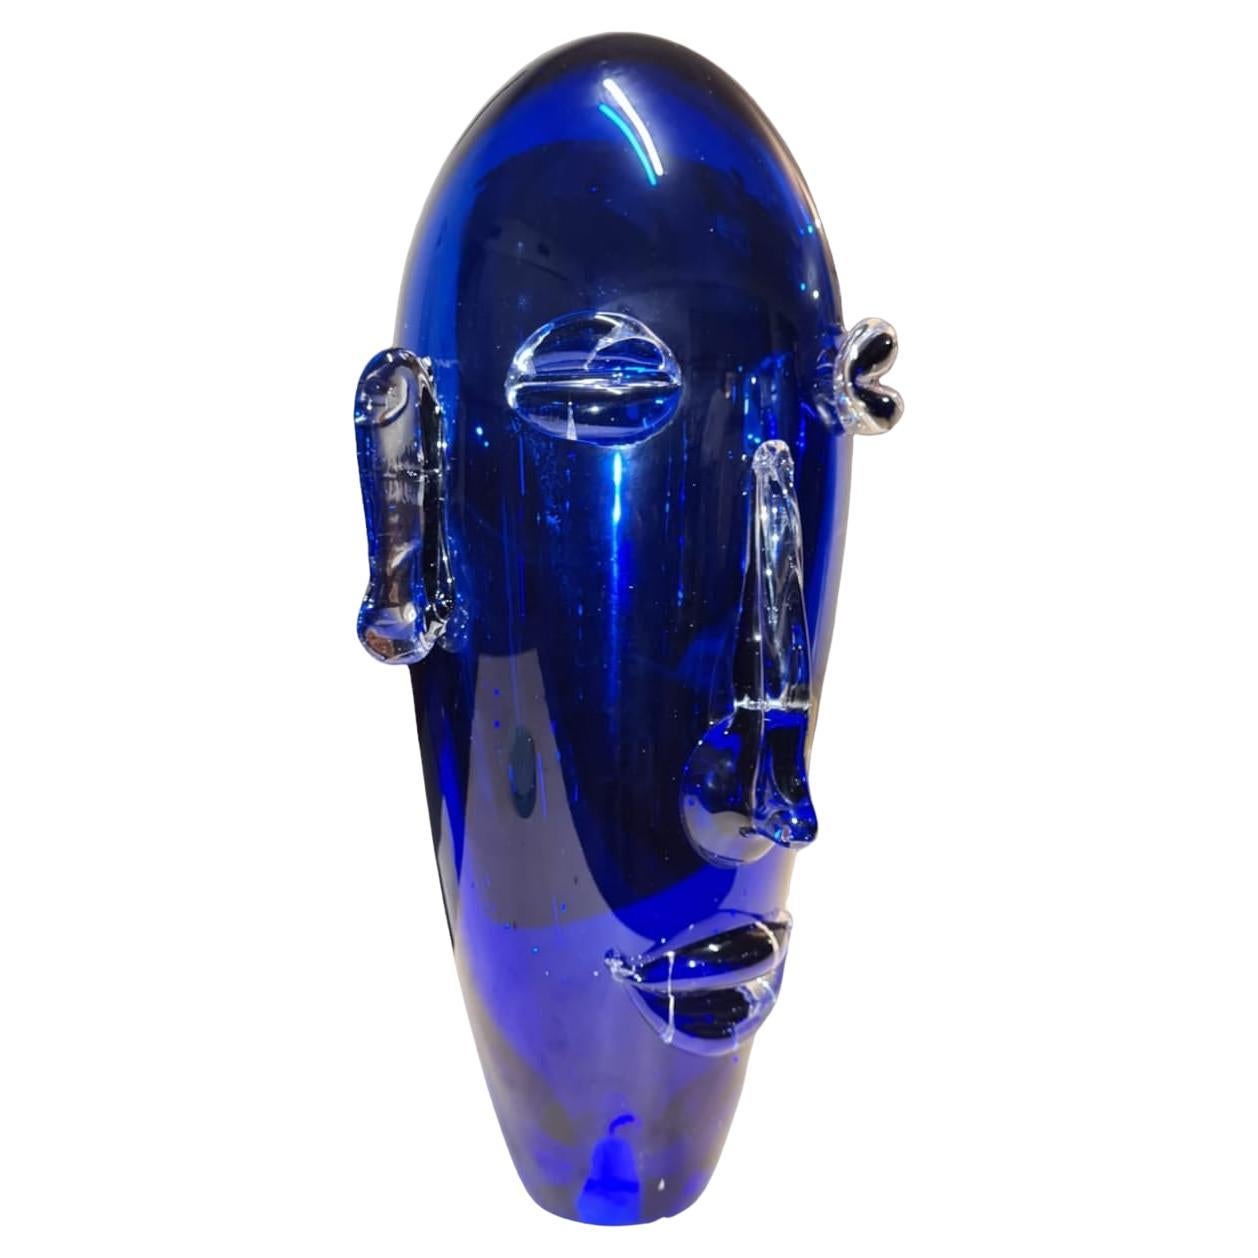 Head sculpture in sapphire blue Murano blown glass, decorative object available